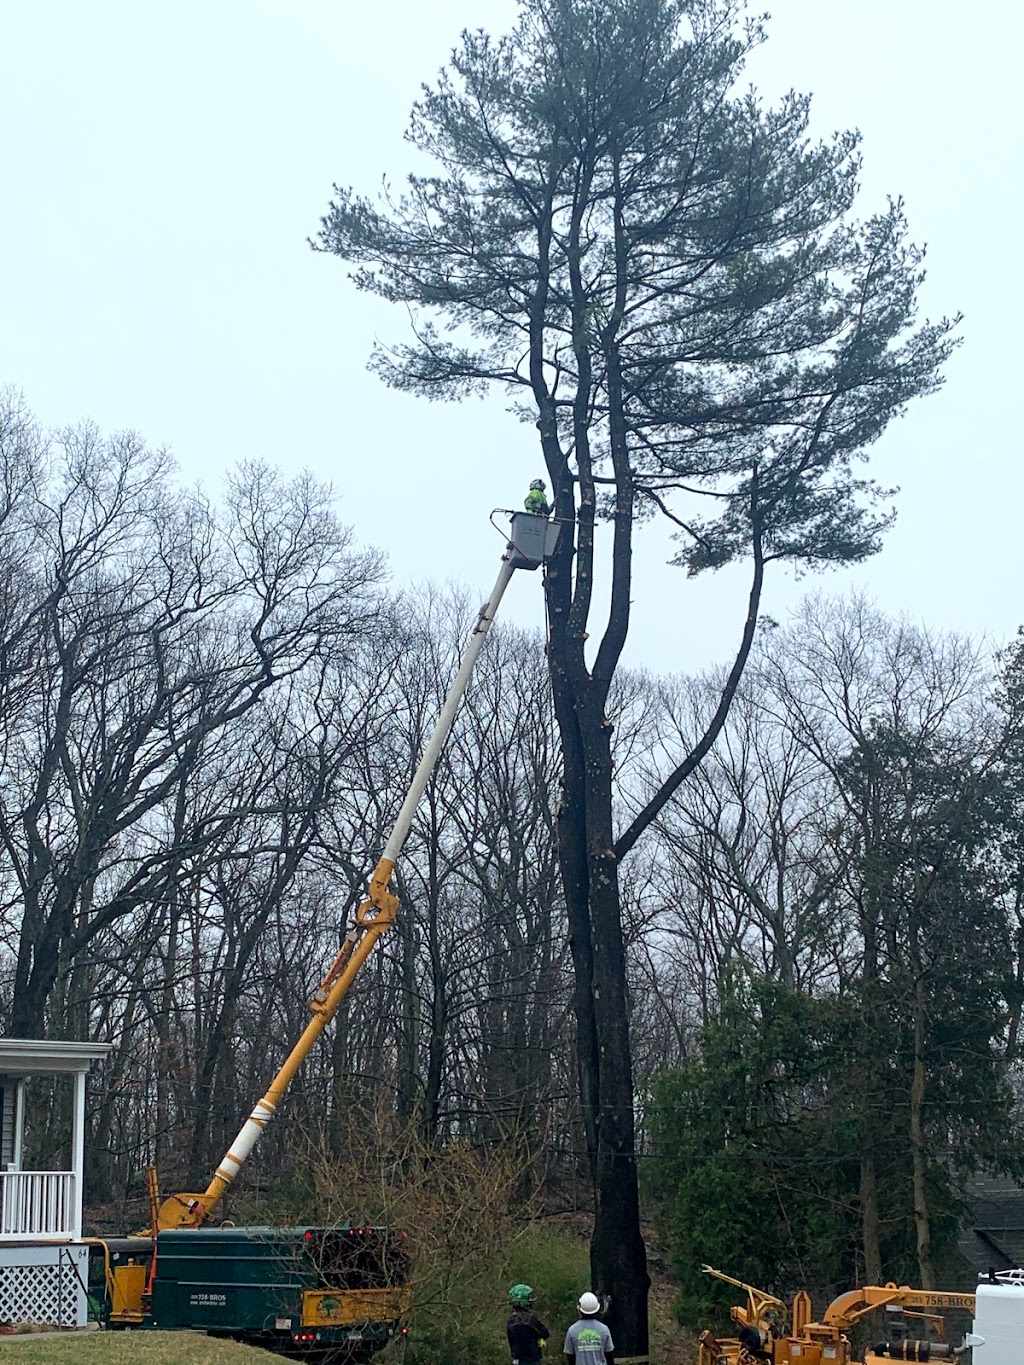 Brothers Tree Service LLC | 227 Commercial St, Watertown, CT 06795 | Phone: (203) 758-2767